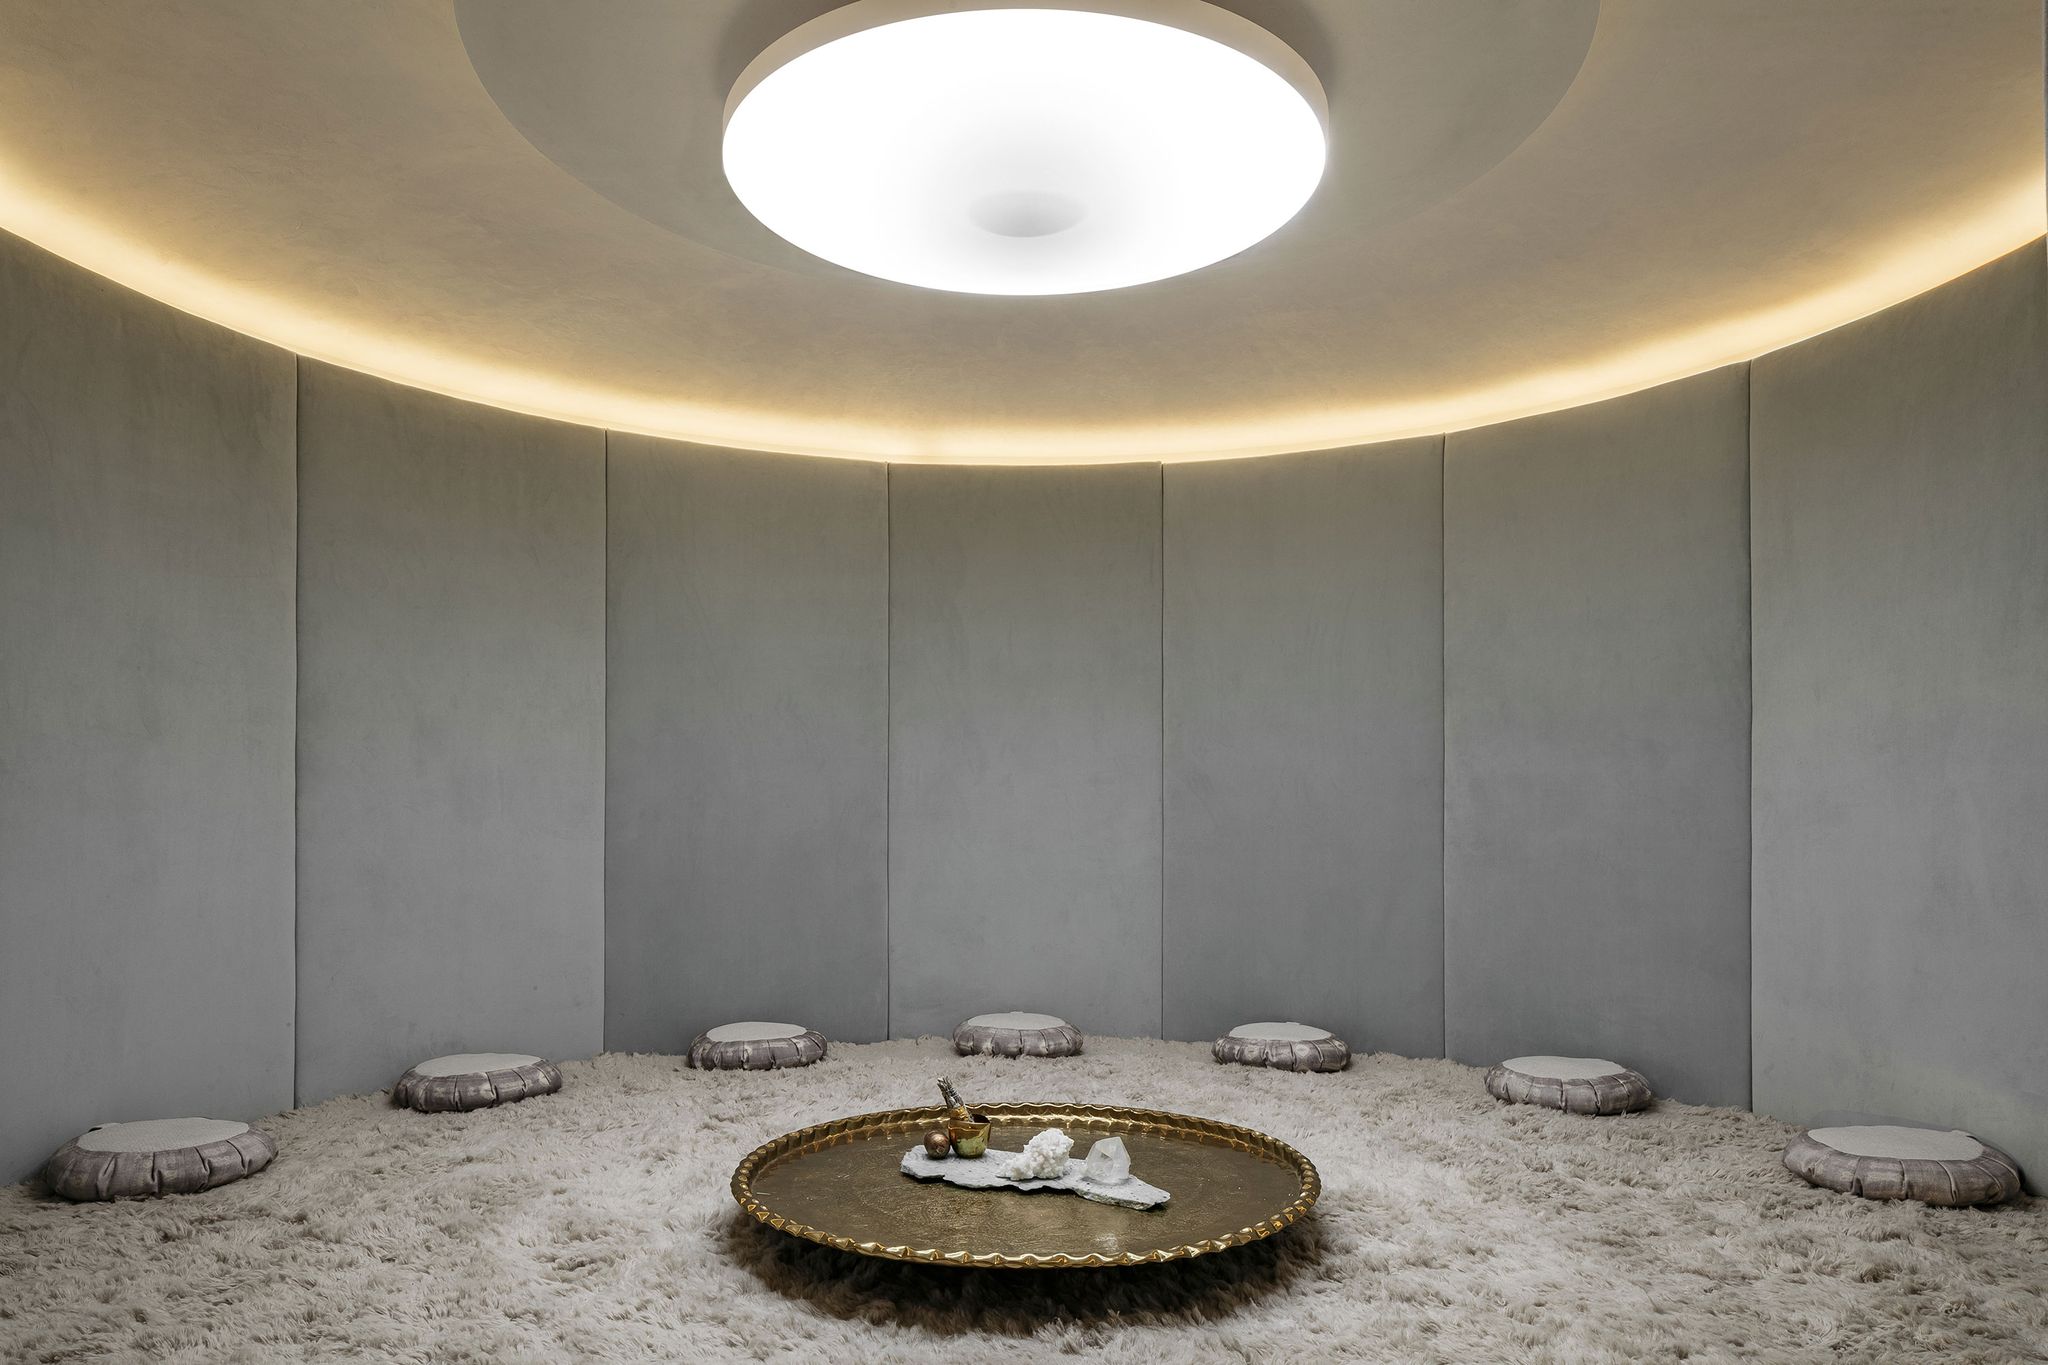 Ceiling, Light, Interior design, Lighting, Wall, Room, Architecture, Circle, Daylighting, Ceiling fixture, 